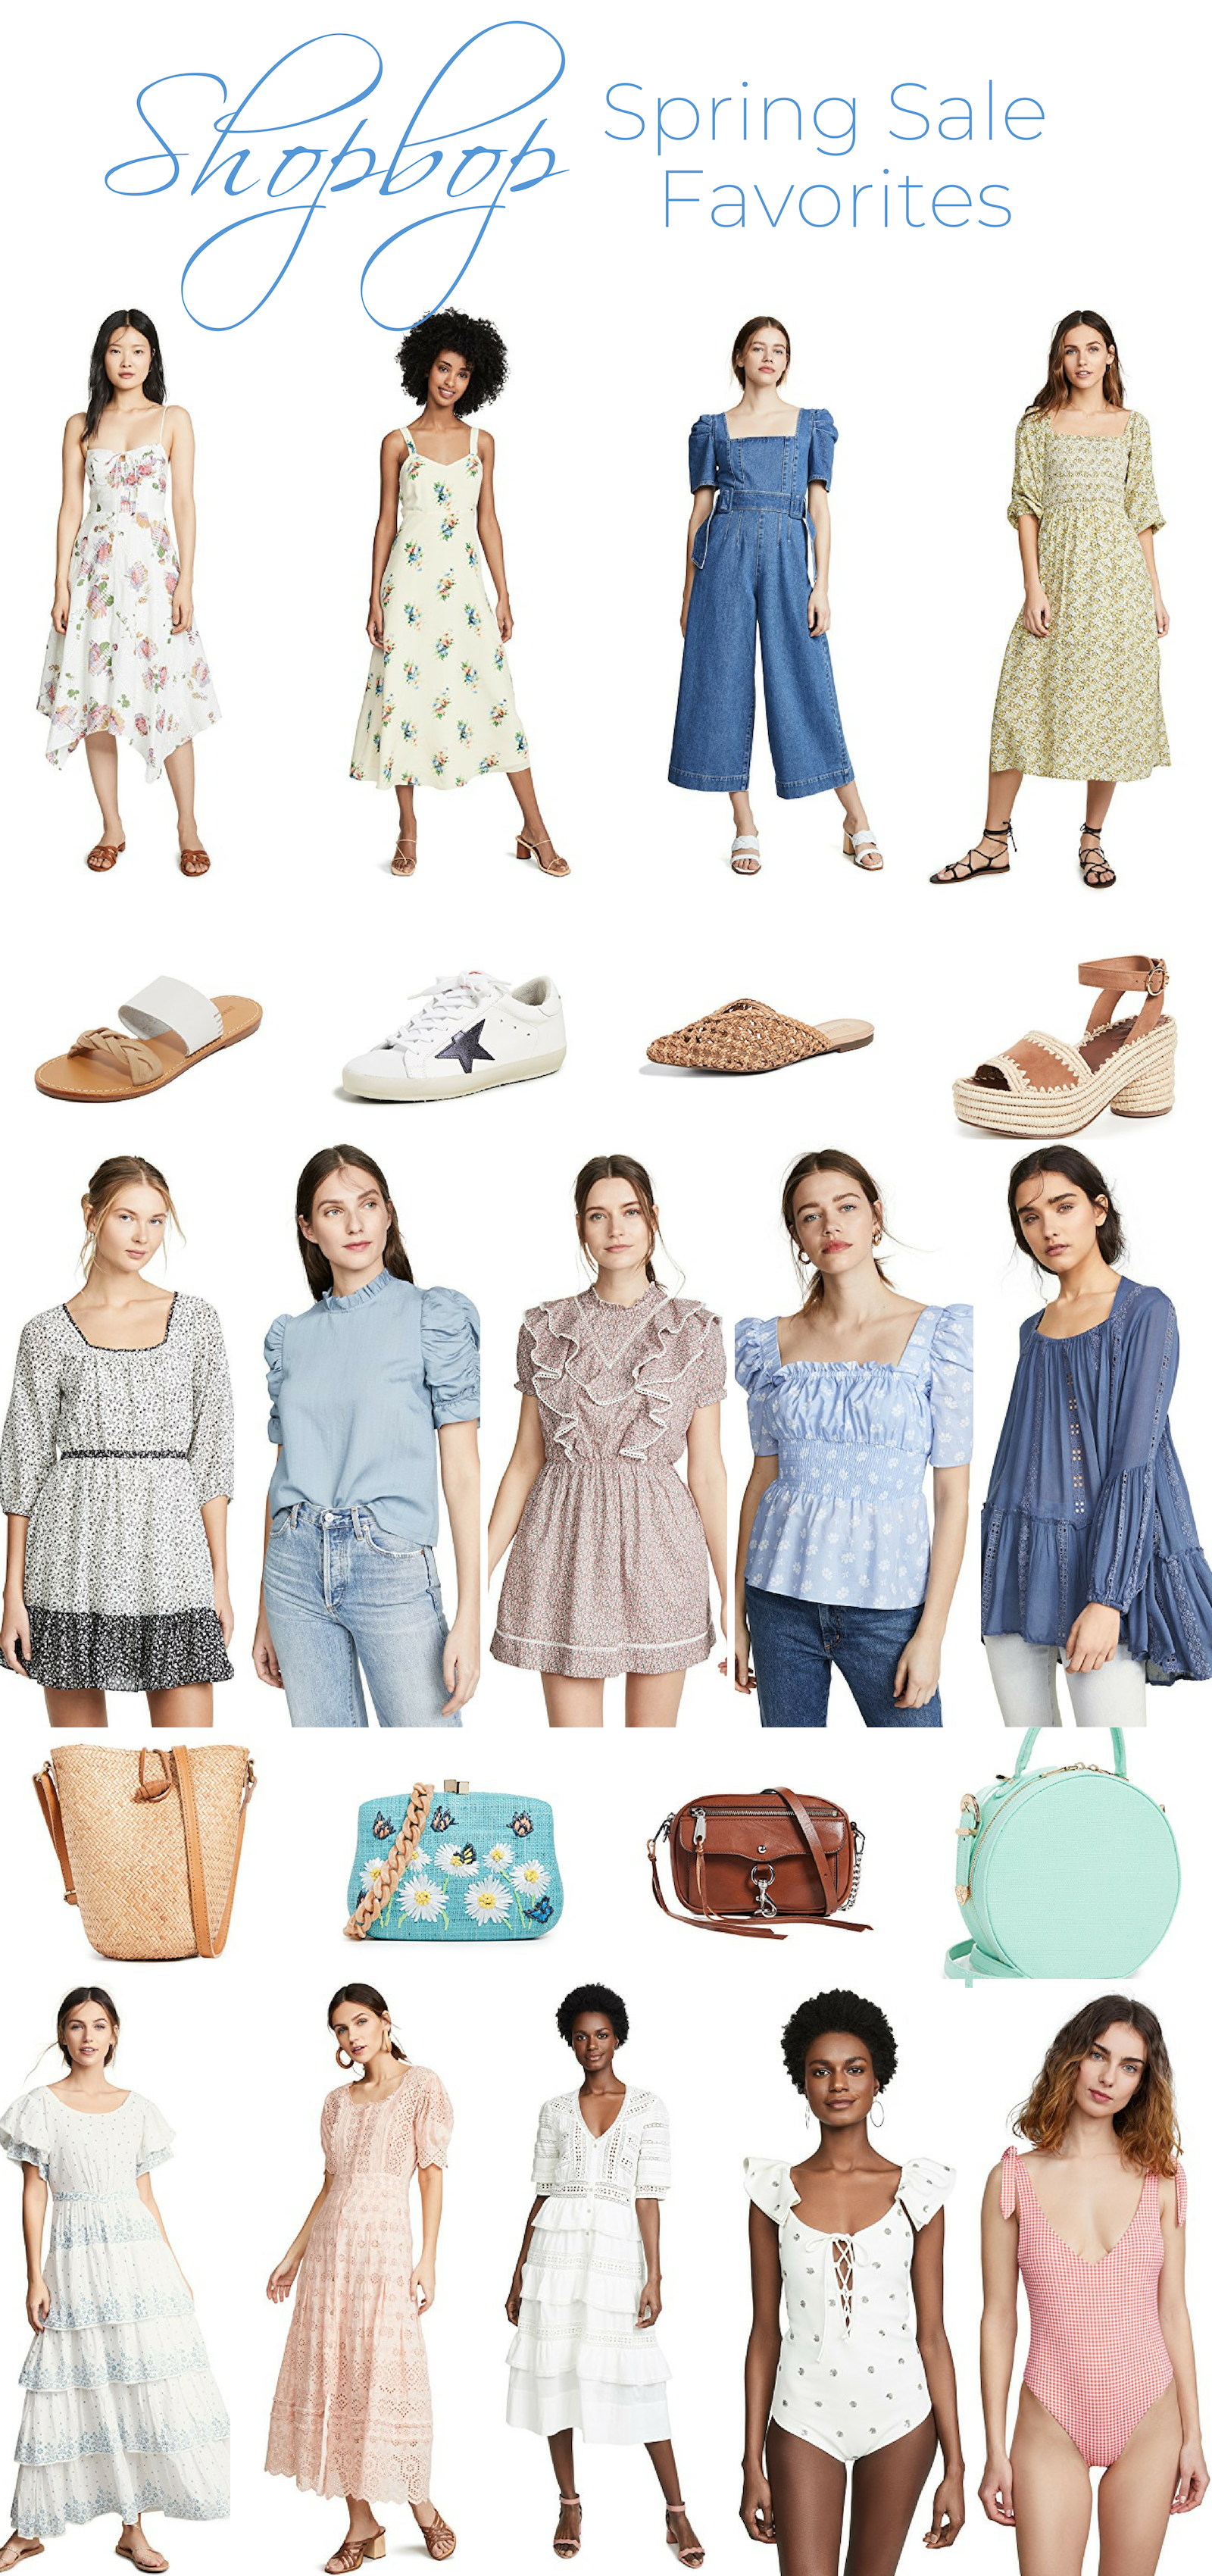 The Best Items from the Shopbop Spring Sale